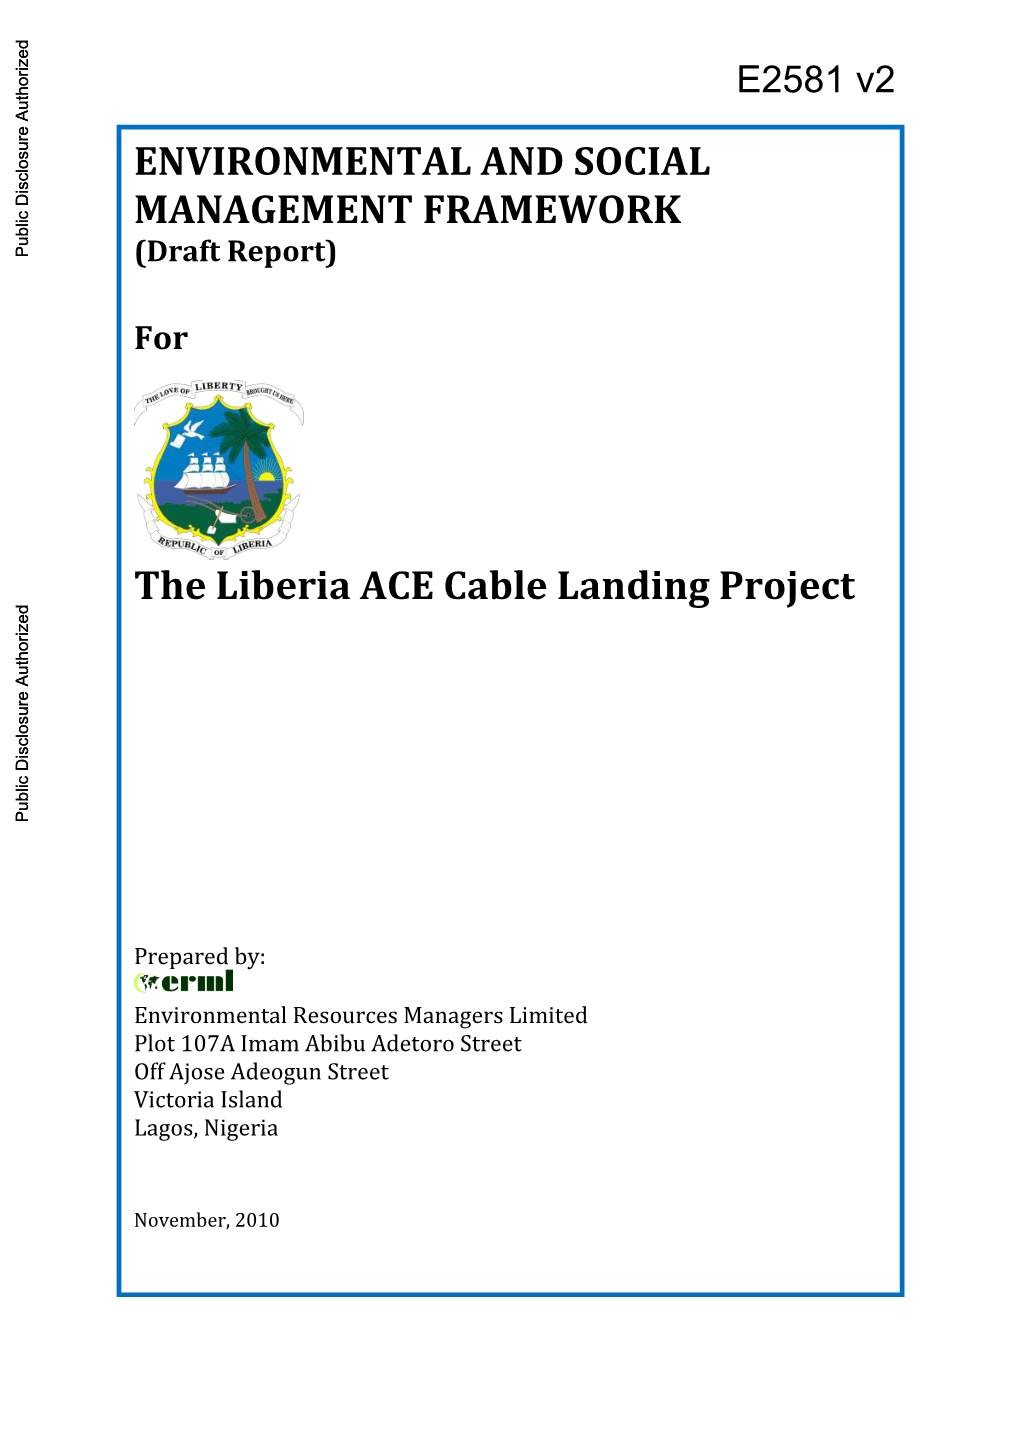 For the Liberia ACE Cable Landing Project